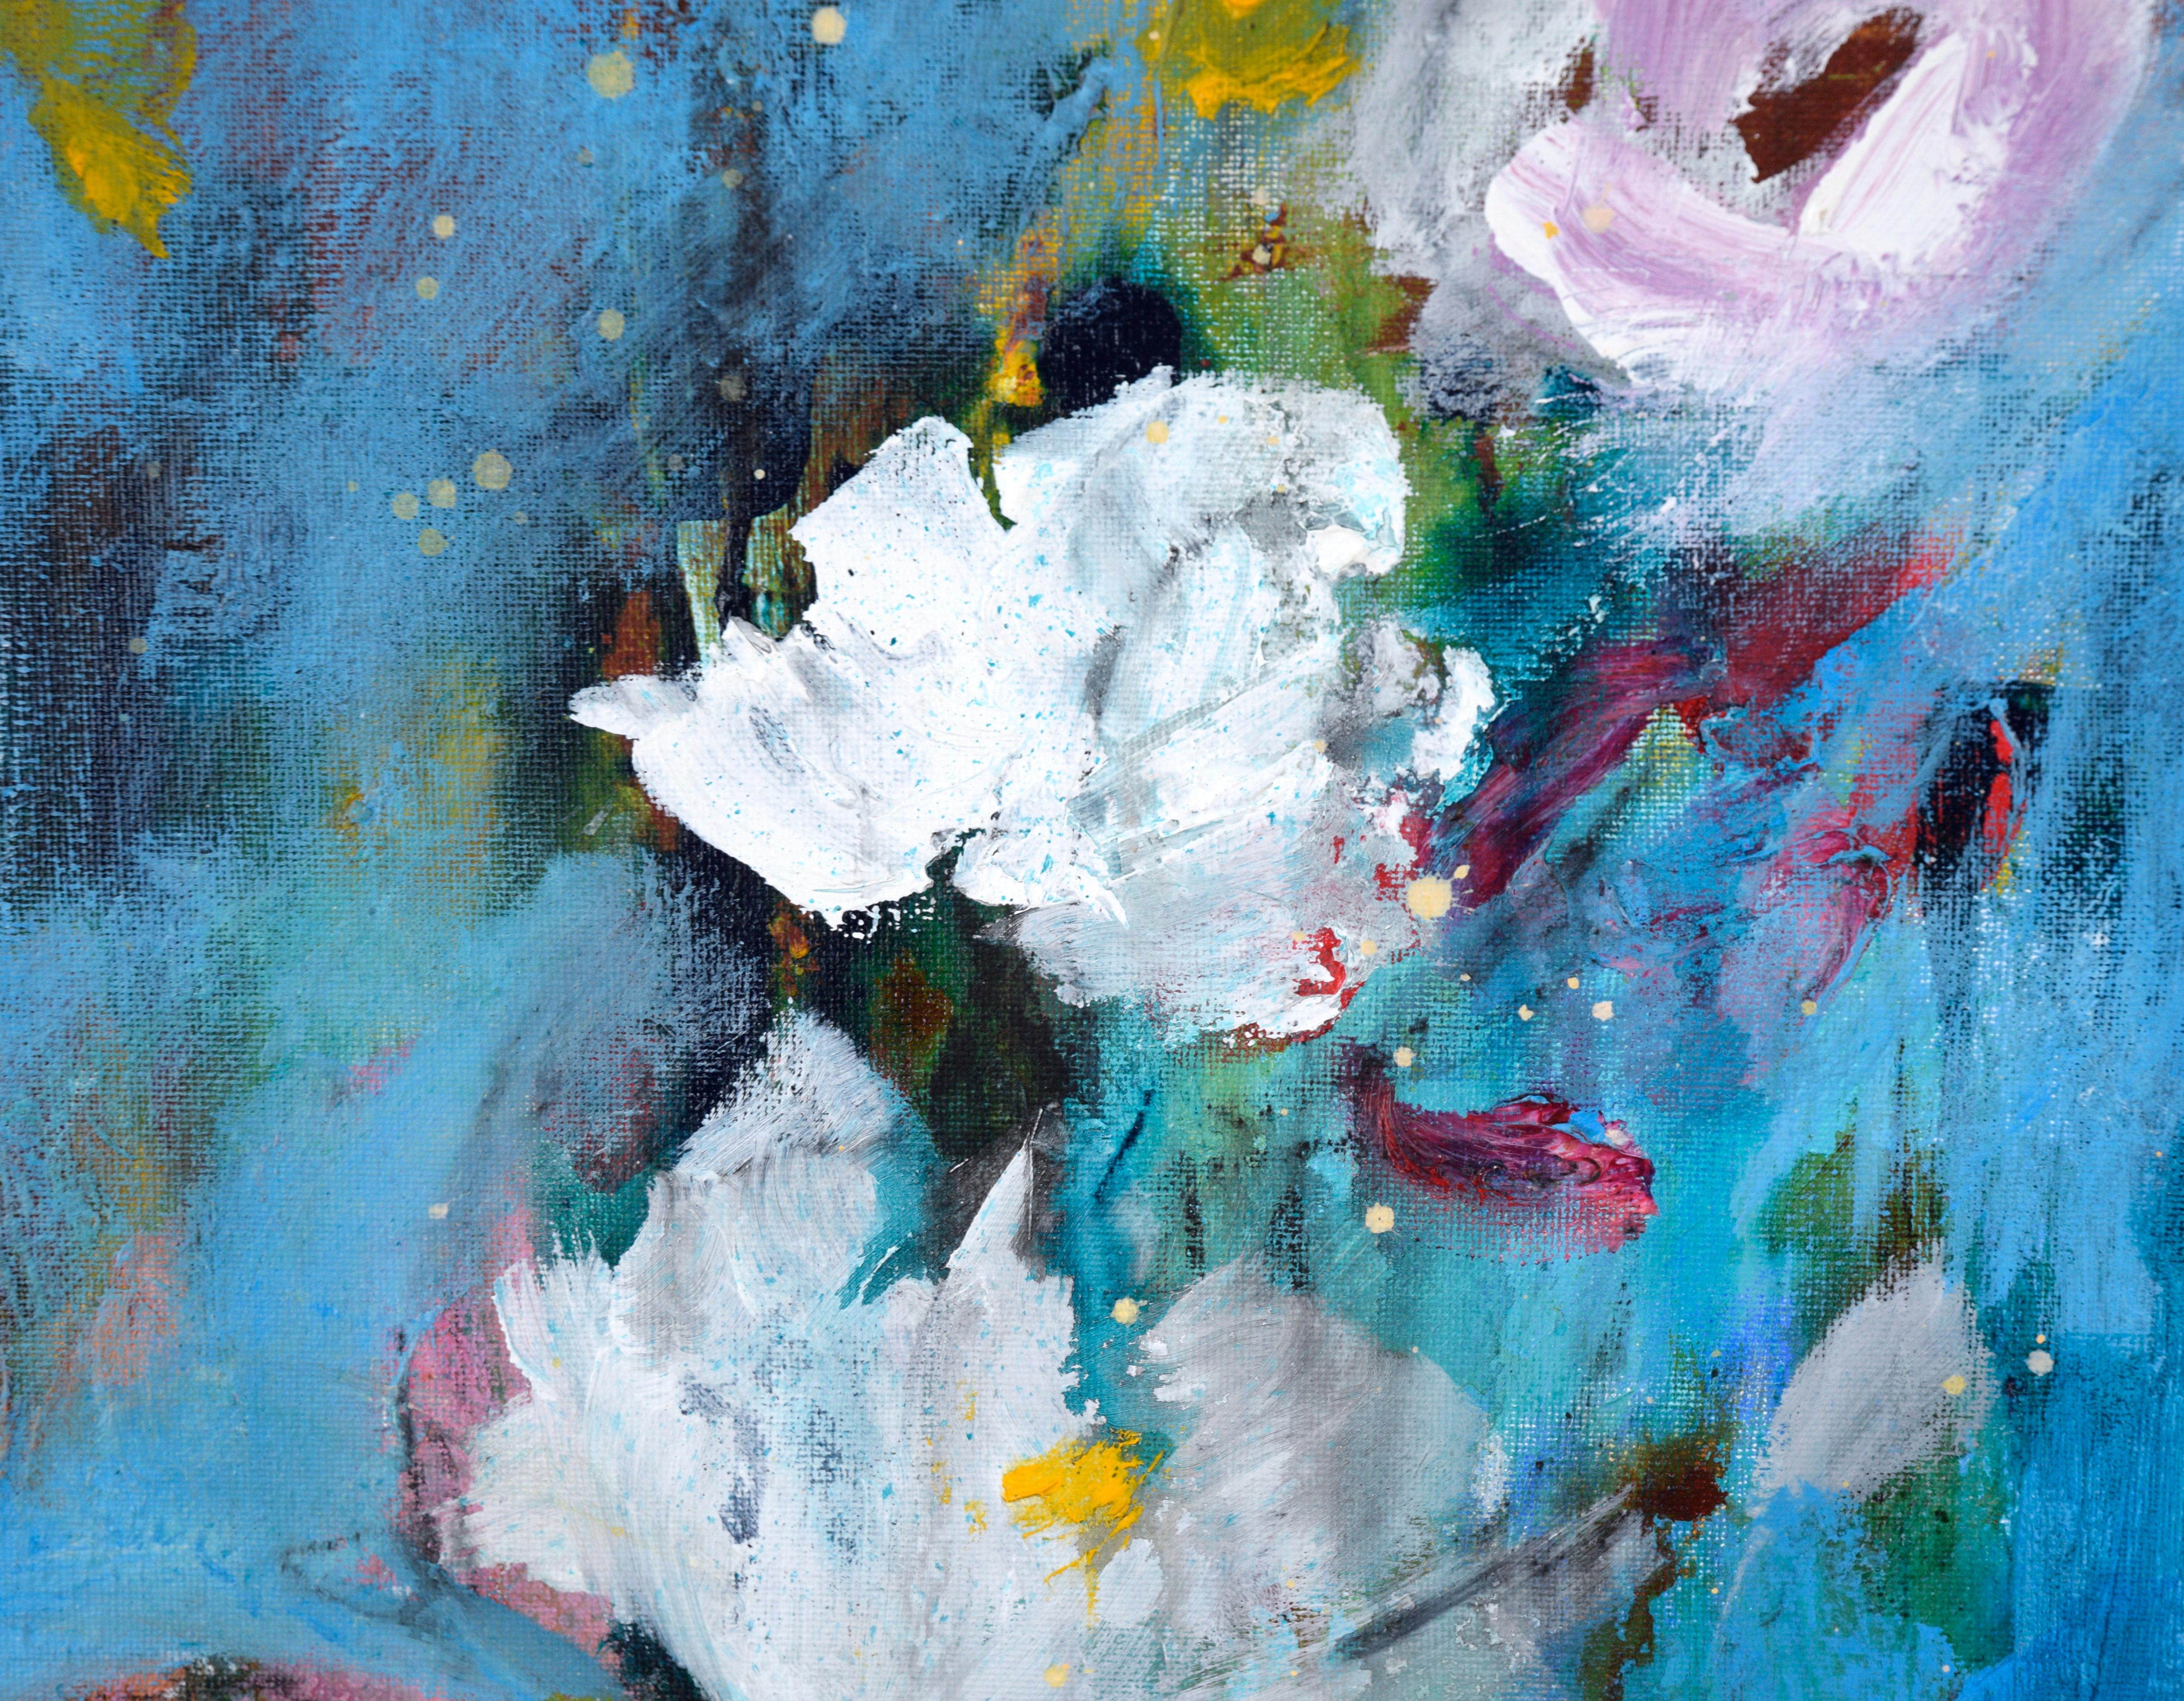 Abstract Expressionist Still Life with White Flowers

Vibrant still life by Ilana Ingber (American, b. 1984). This piece has white and soft pink flowers that pop out from a bold blue background. There are other floral shapes, somewhat abstracted.